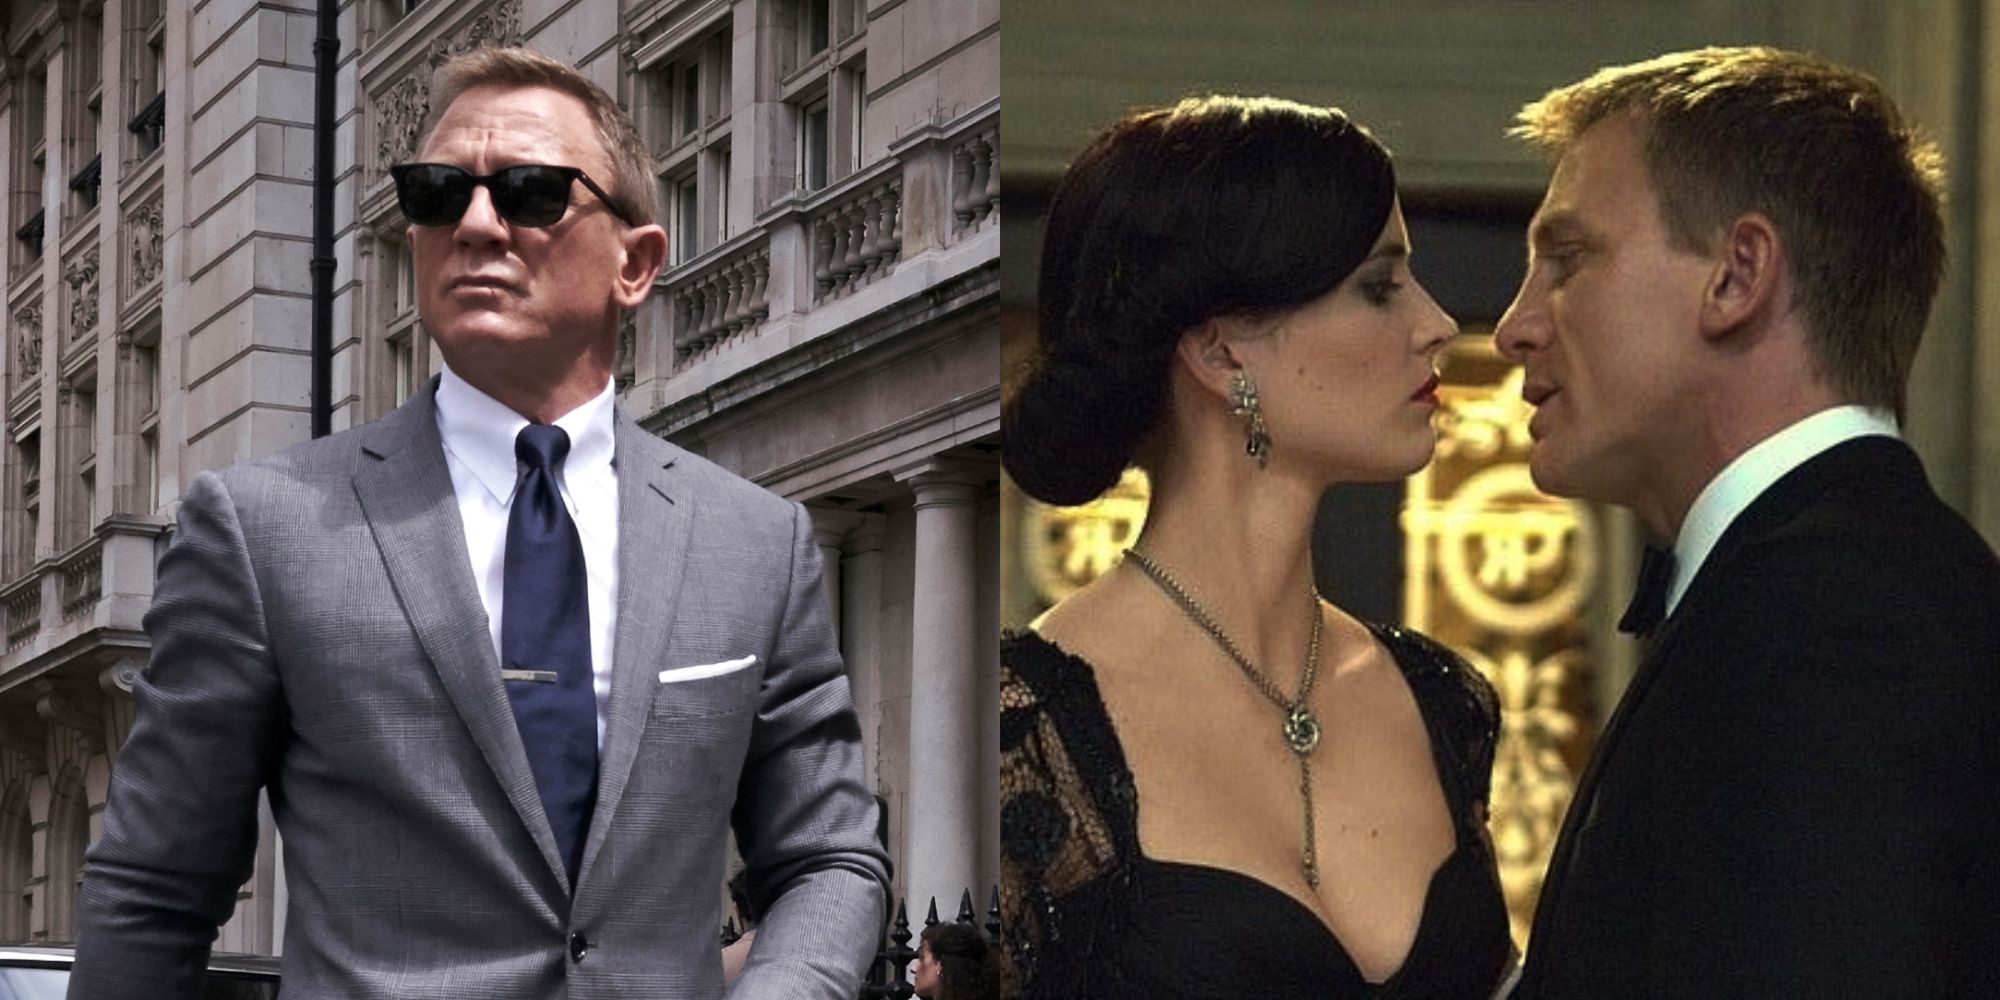 A split image of James Bond walking down the street and Vespa and James standing together in the movies